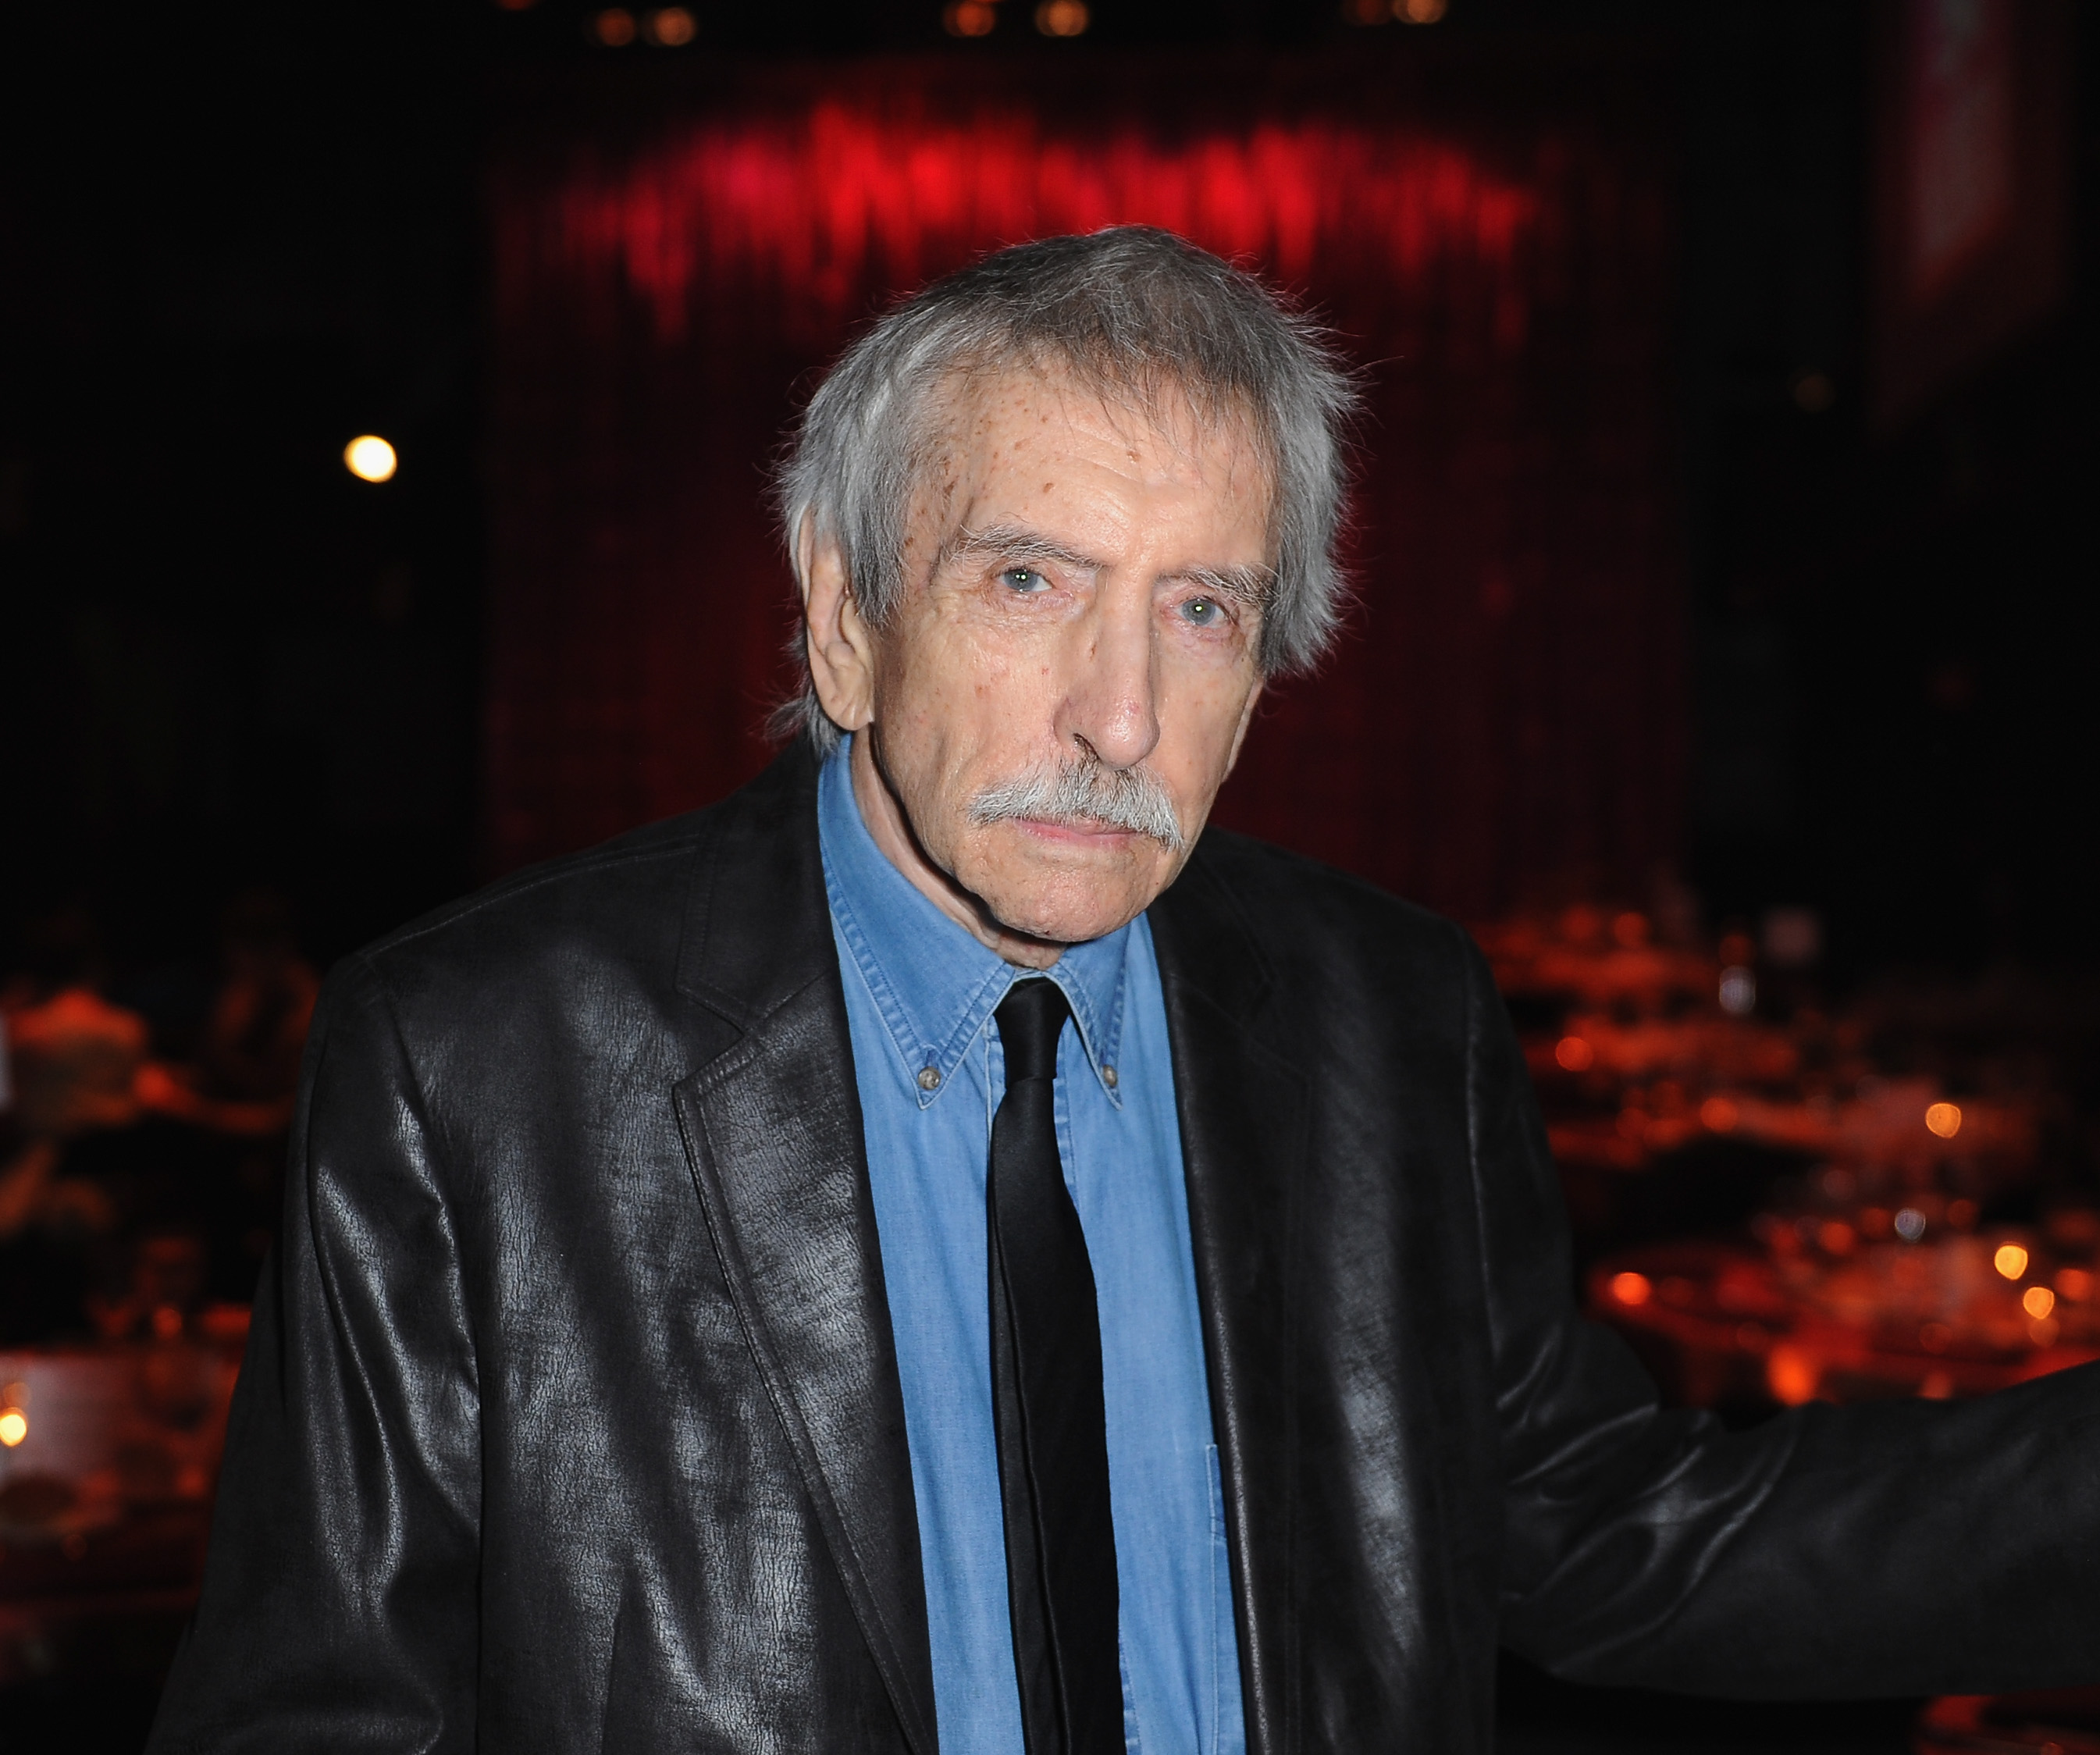 Playwright Edward Albee attends the La Mama Celebrates 51 Gala at Ellen Stewart Theatre on Feb. 27, 2013 in New York City. (Wendell Teodoro—WireImage/Getty Images)